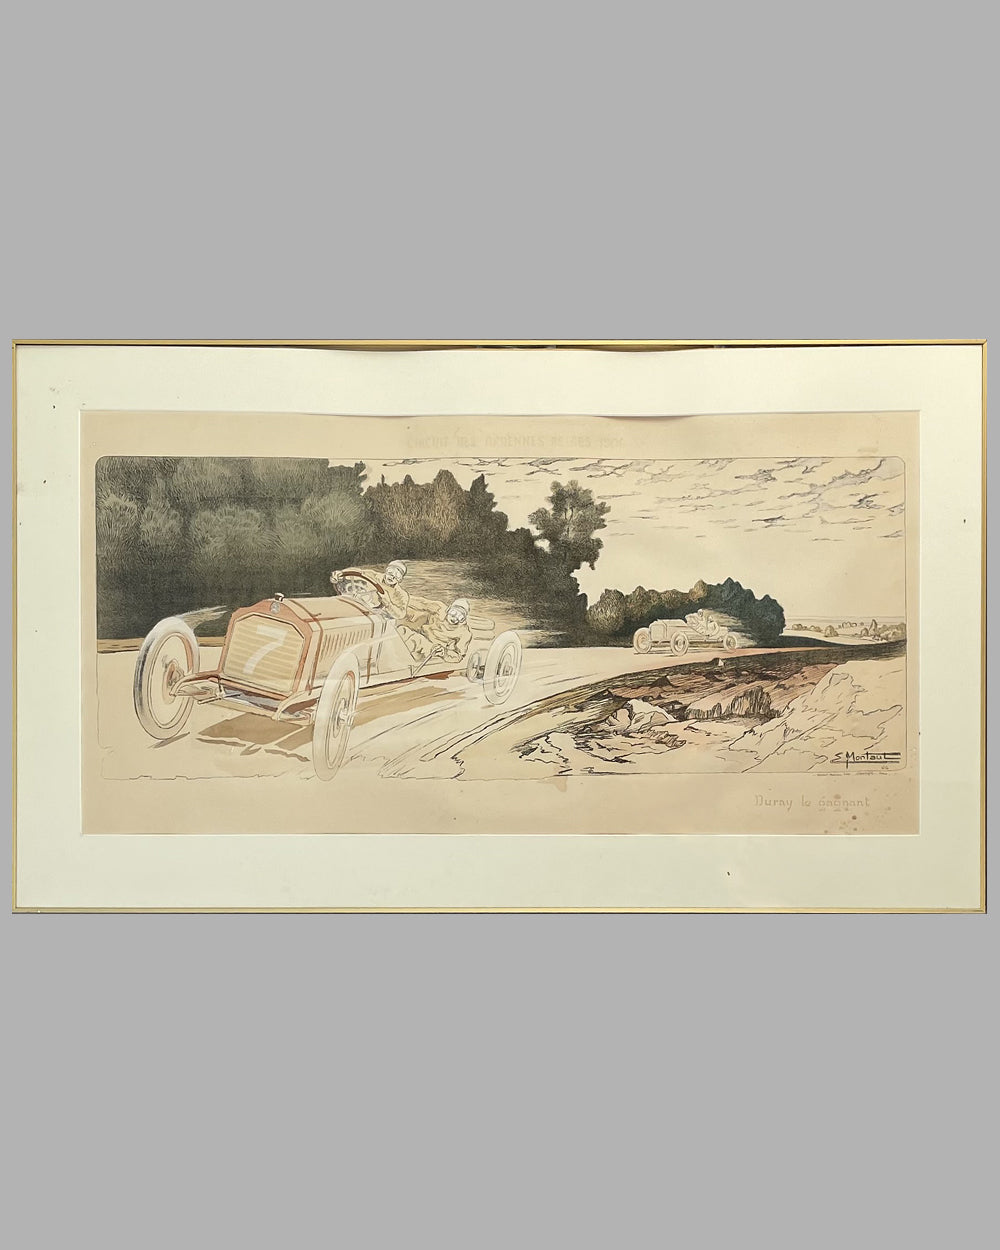 Duray le gagnaut, hand colored lithograph, 1906 by Ernest Montaut